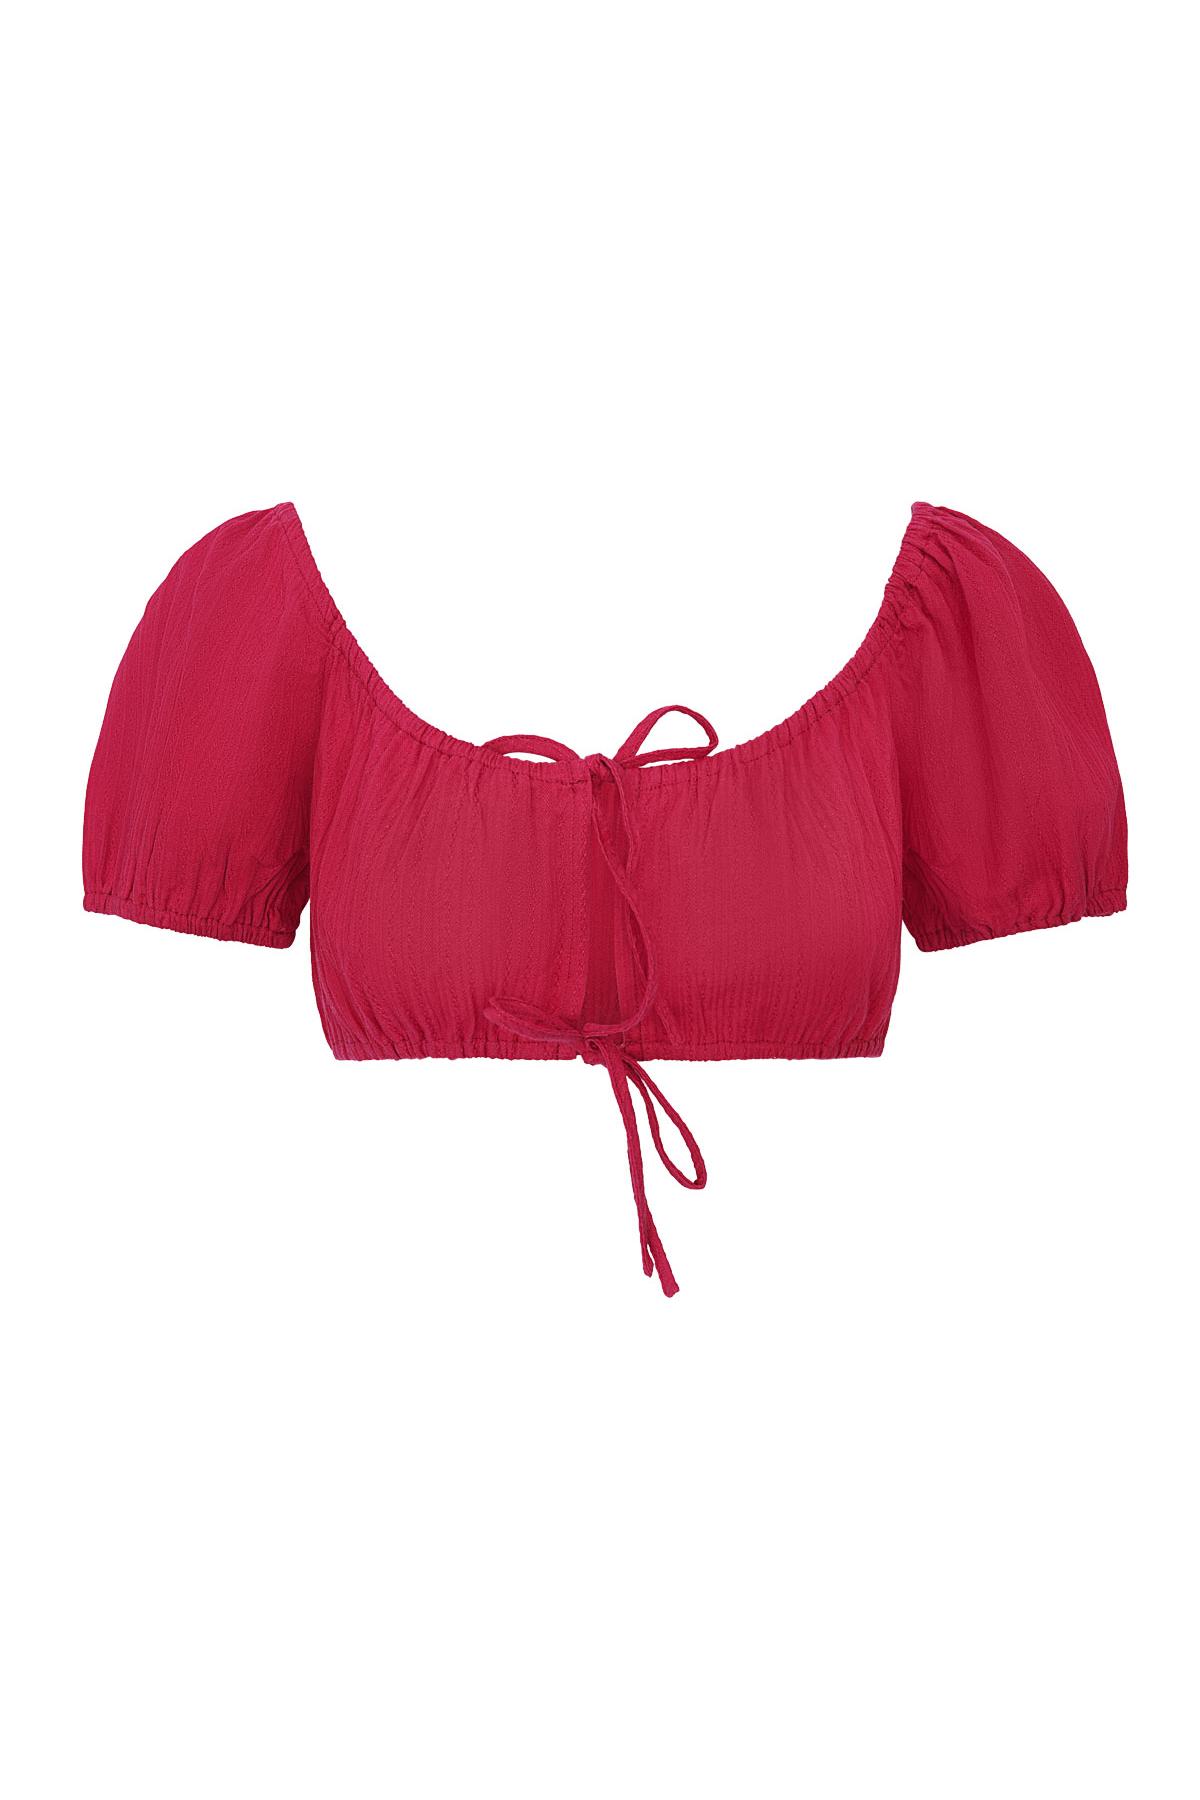 Crop top knotted Red S h5 